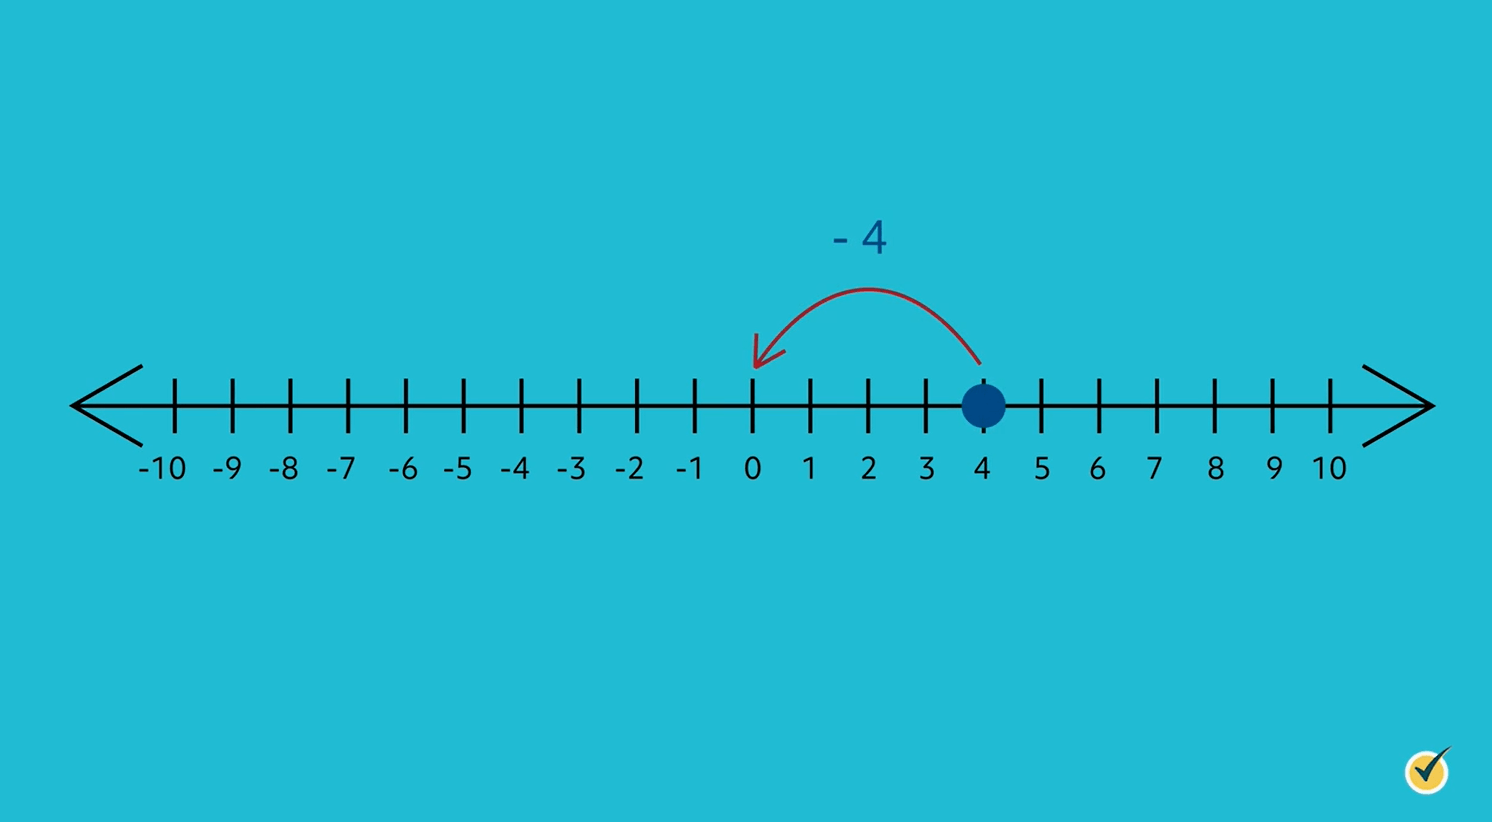 Number line with arrow pointing from +4 to 0